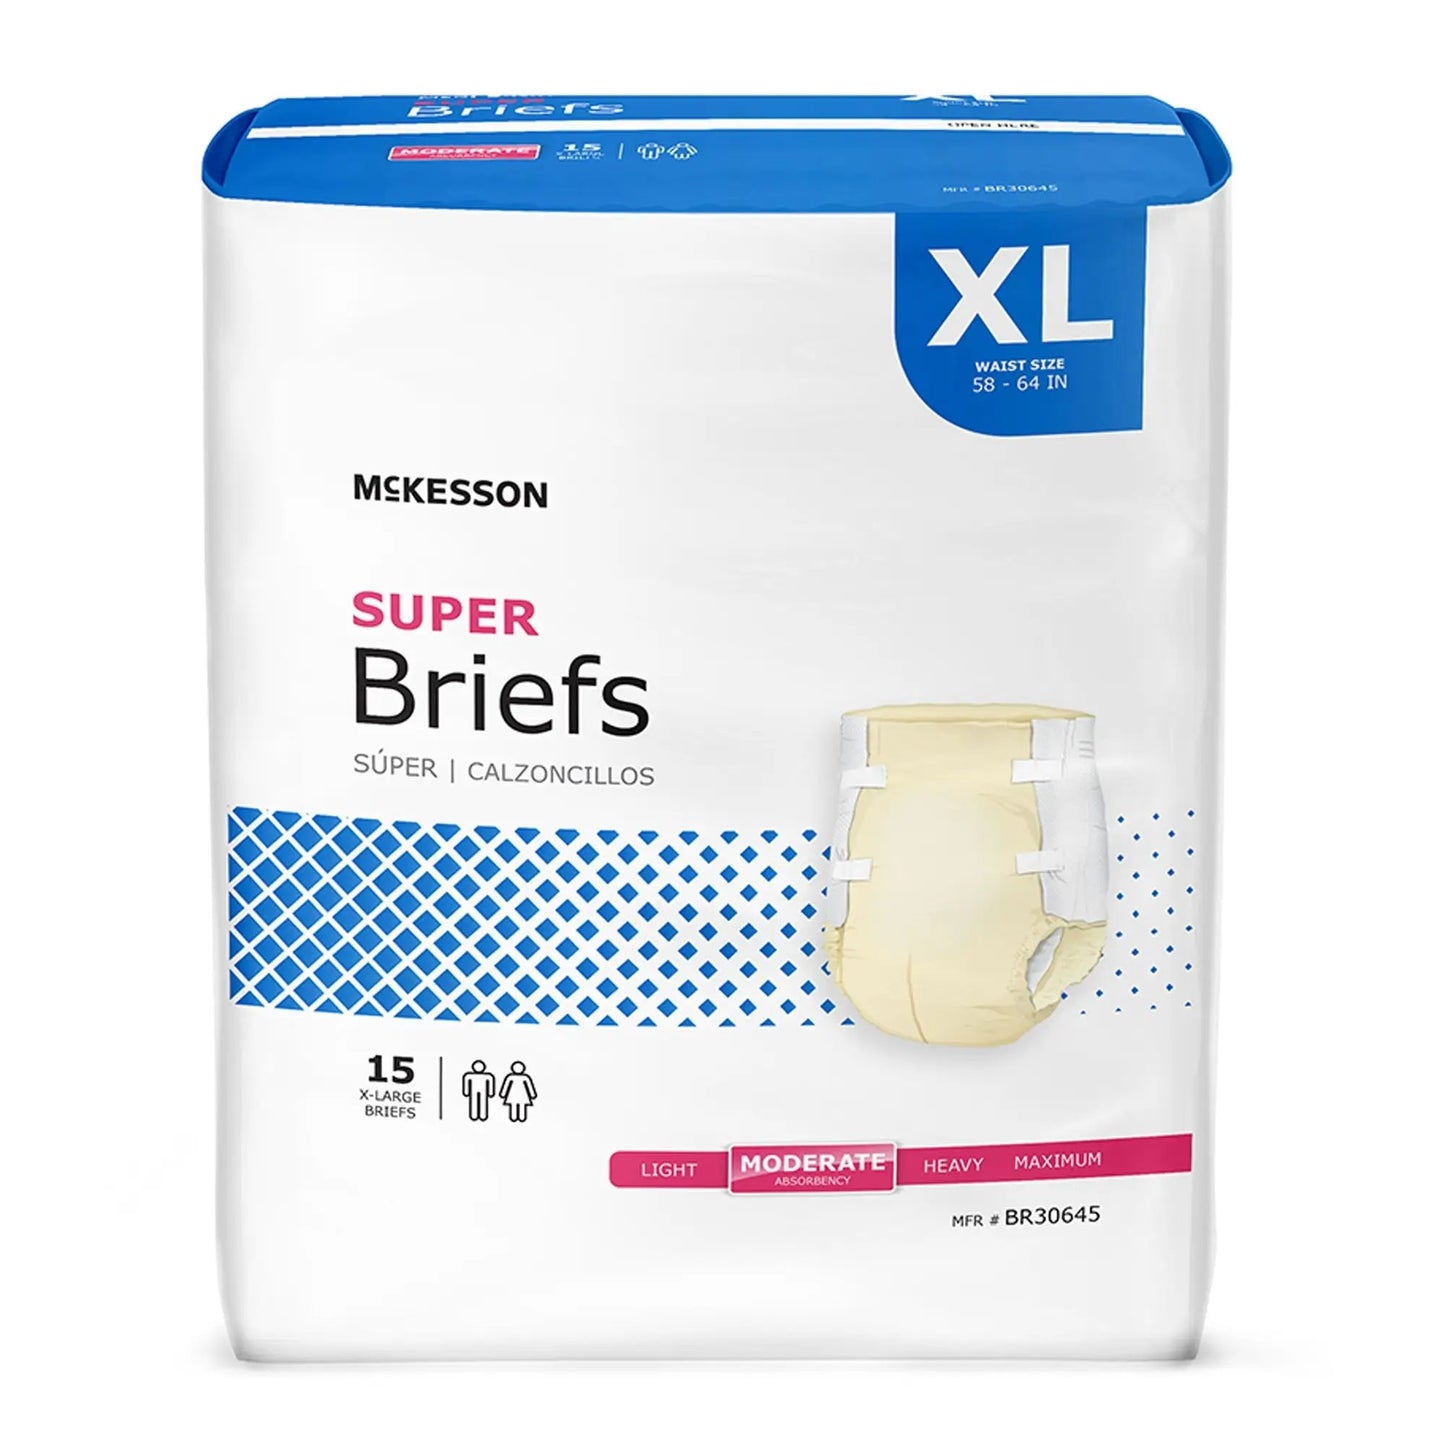 McKesson Unisex Adult Incontinence Super Brief Moderate Absorbency